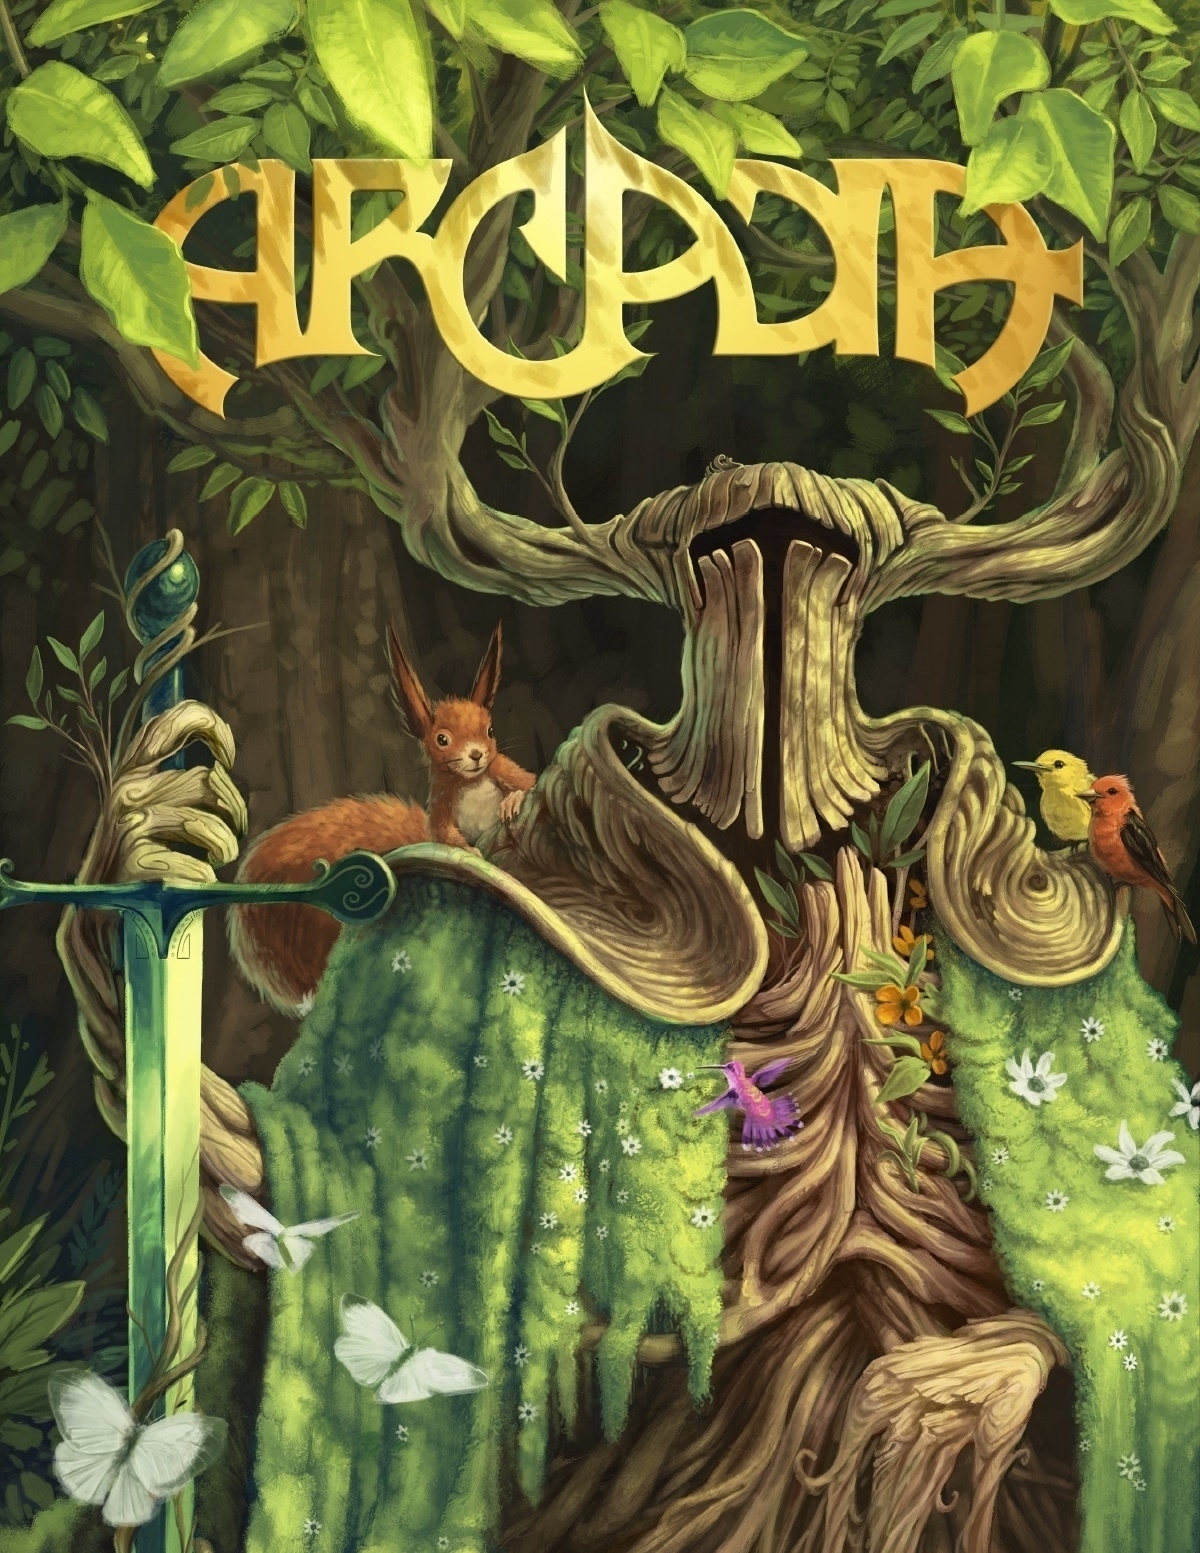 Magazine cover Arcadia depicting a plant life humanoid in form of a knight who has a squirrel on one shoulder and two birds on the other. Knight also holding a sword, blade tip against ground.